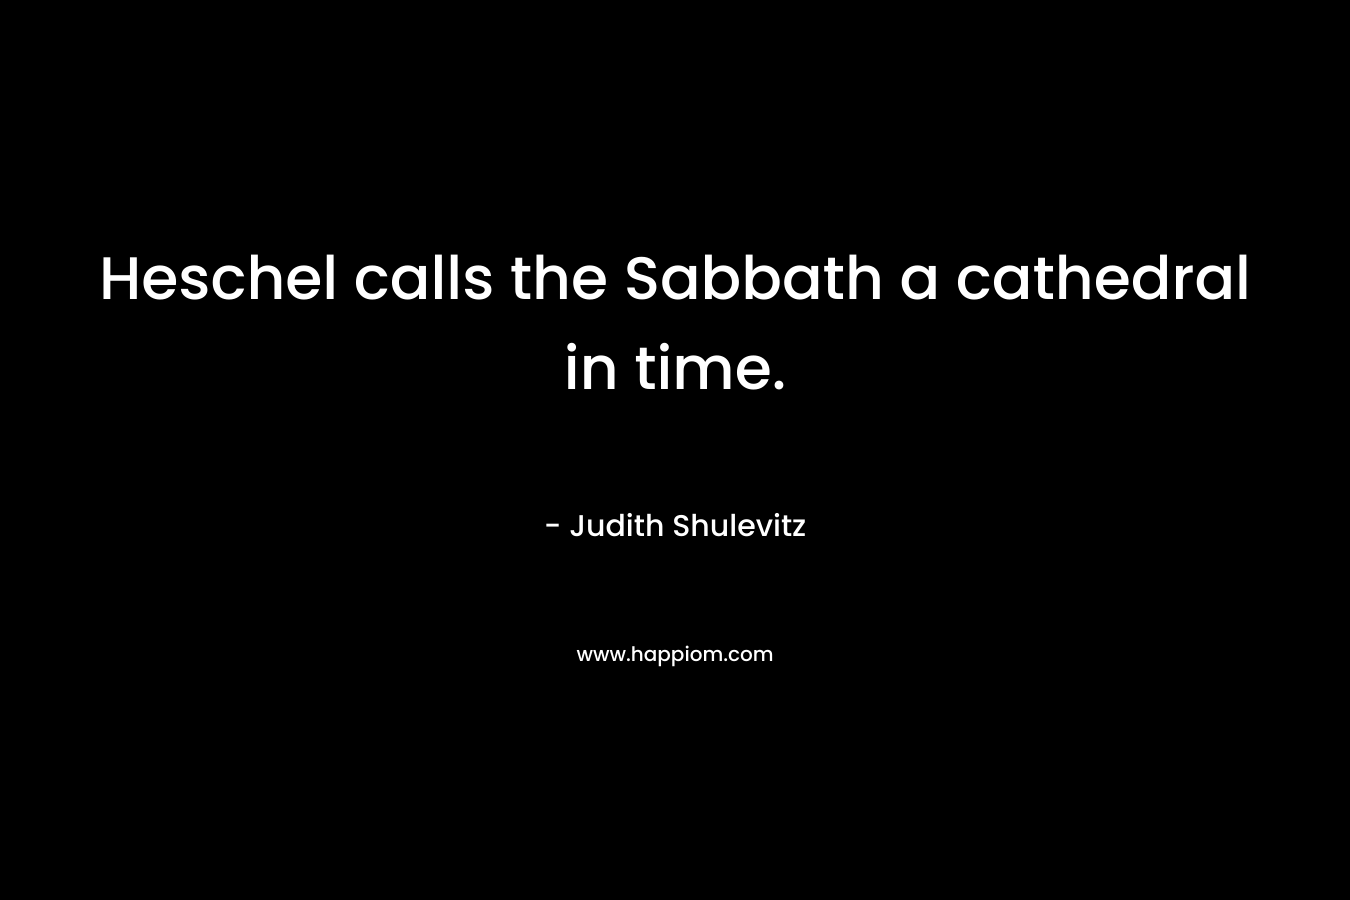 Heschel calls the Sabbath a cathedral in time. – Judith Shulevitz